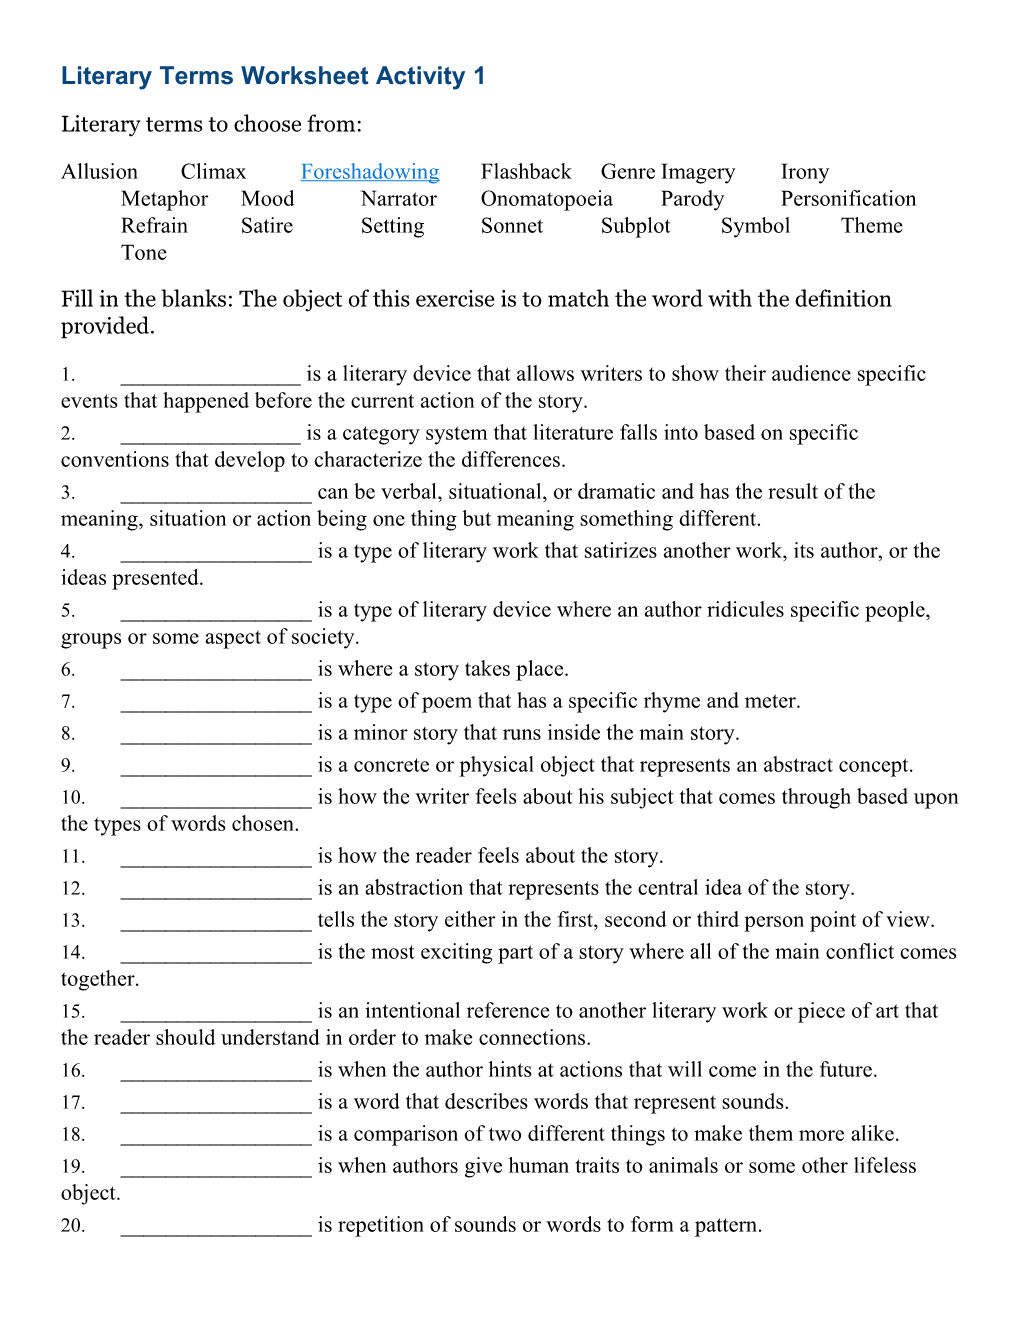 Literary Terms Worksheet Activity 1